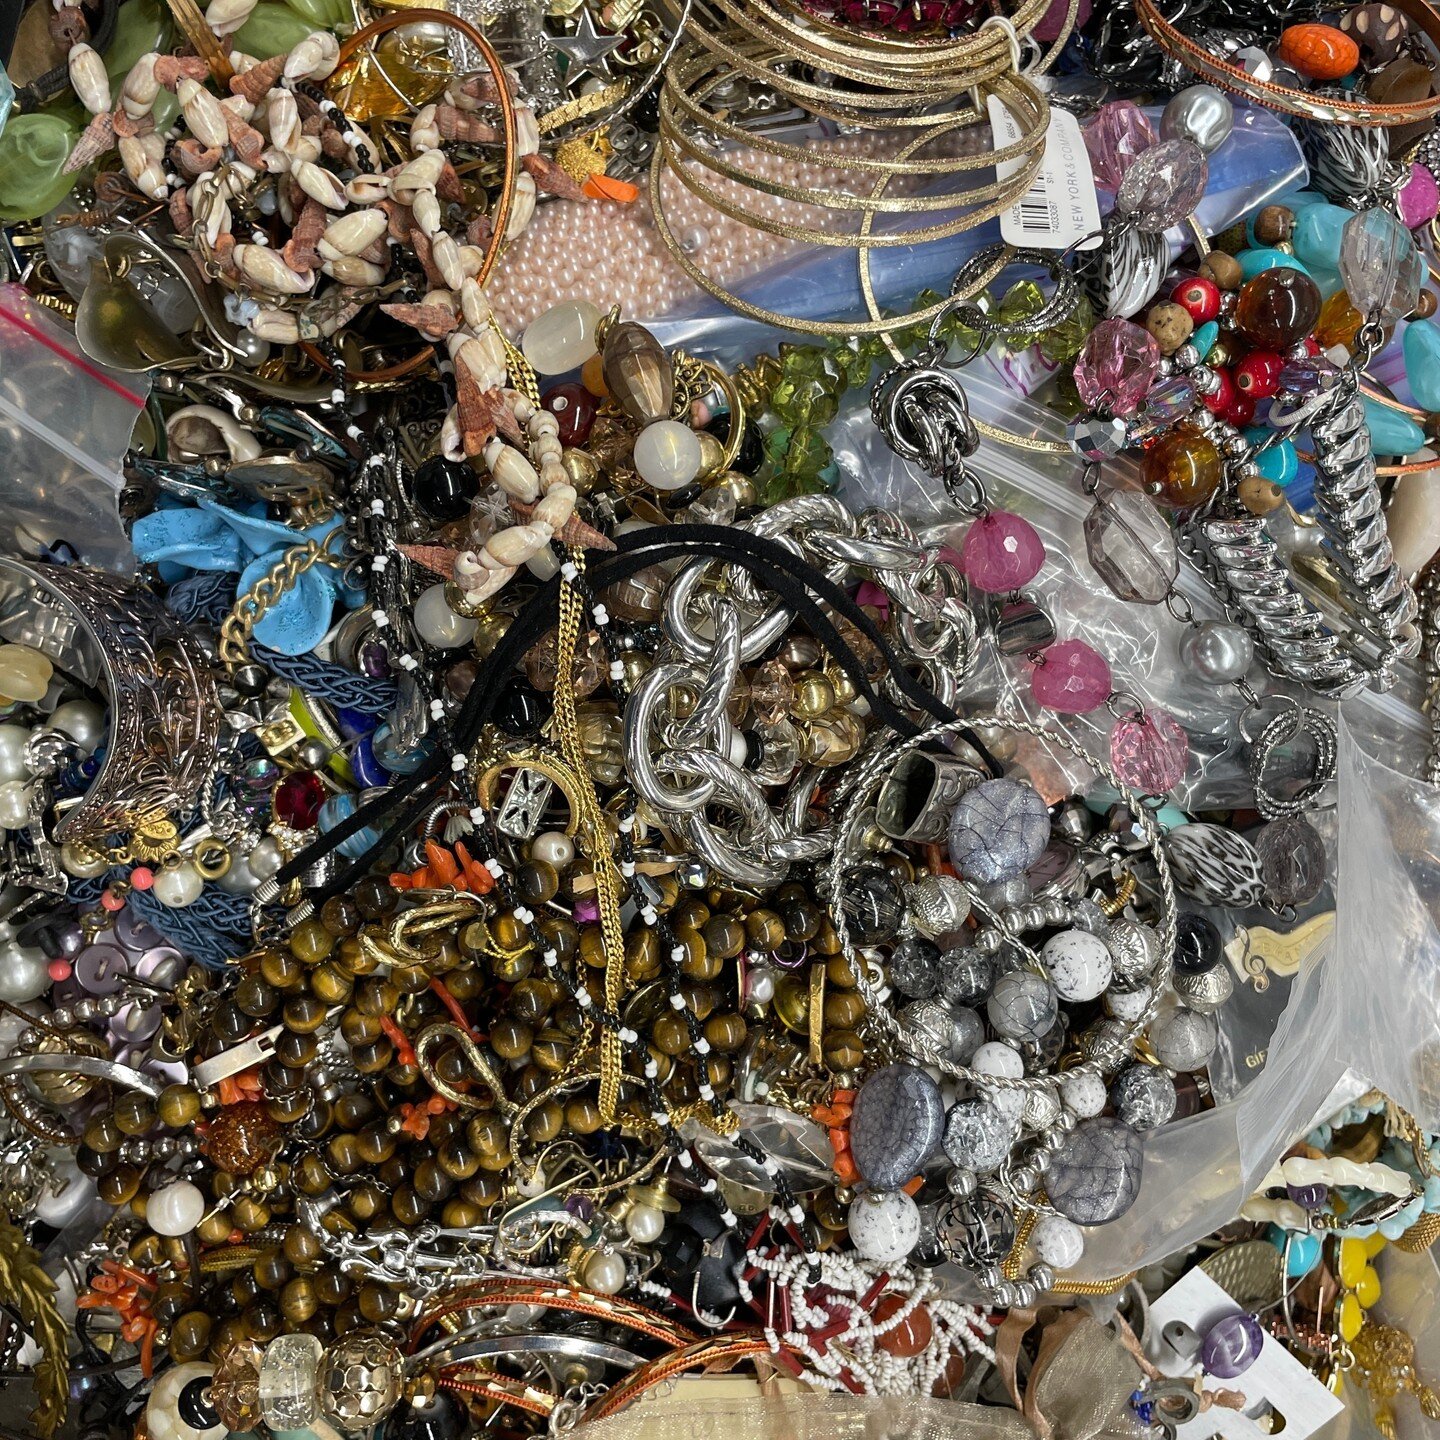 It's about to get RADICAL! Come to our full-day event on Sunday, Oct 29th and learn about the Radical Jewelry Makeover - Make some new jewelry using old jewelry! Try out some mindful yoga to energize your heart chakra! Meet our visiting PlySpace Resi